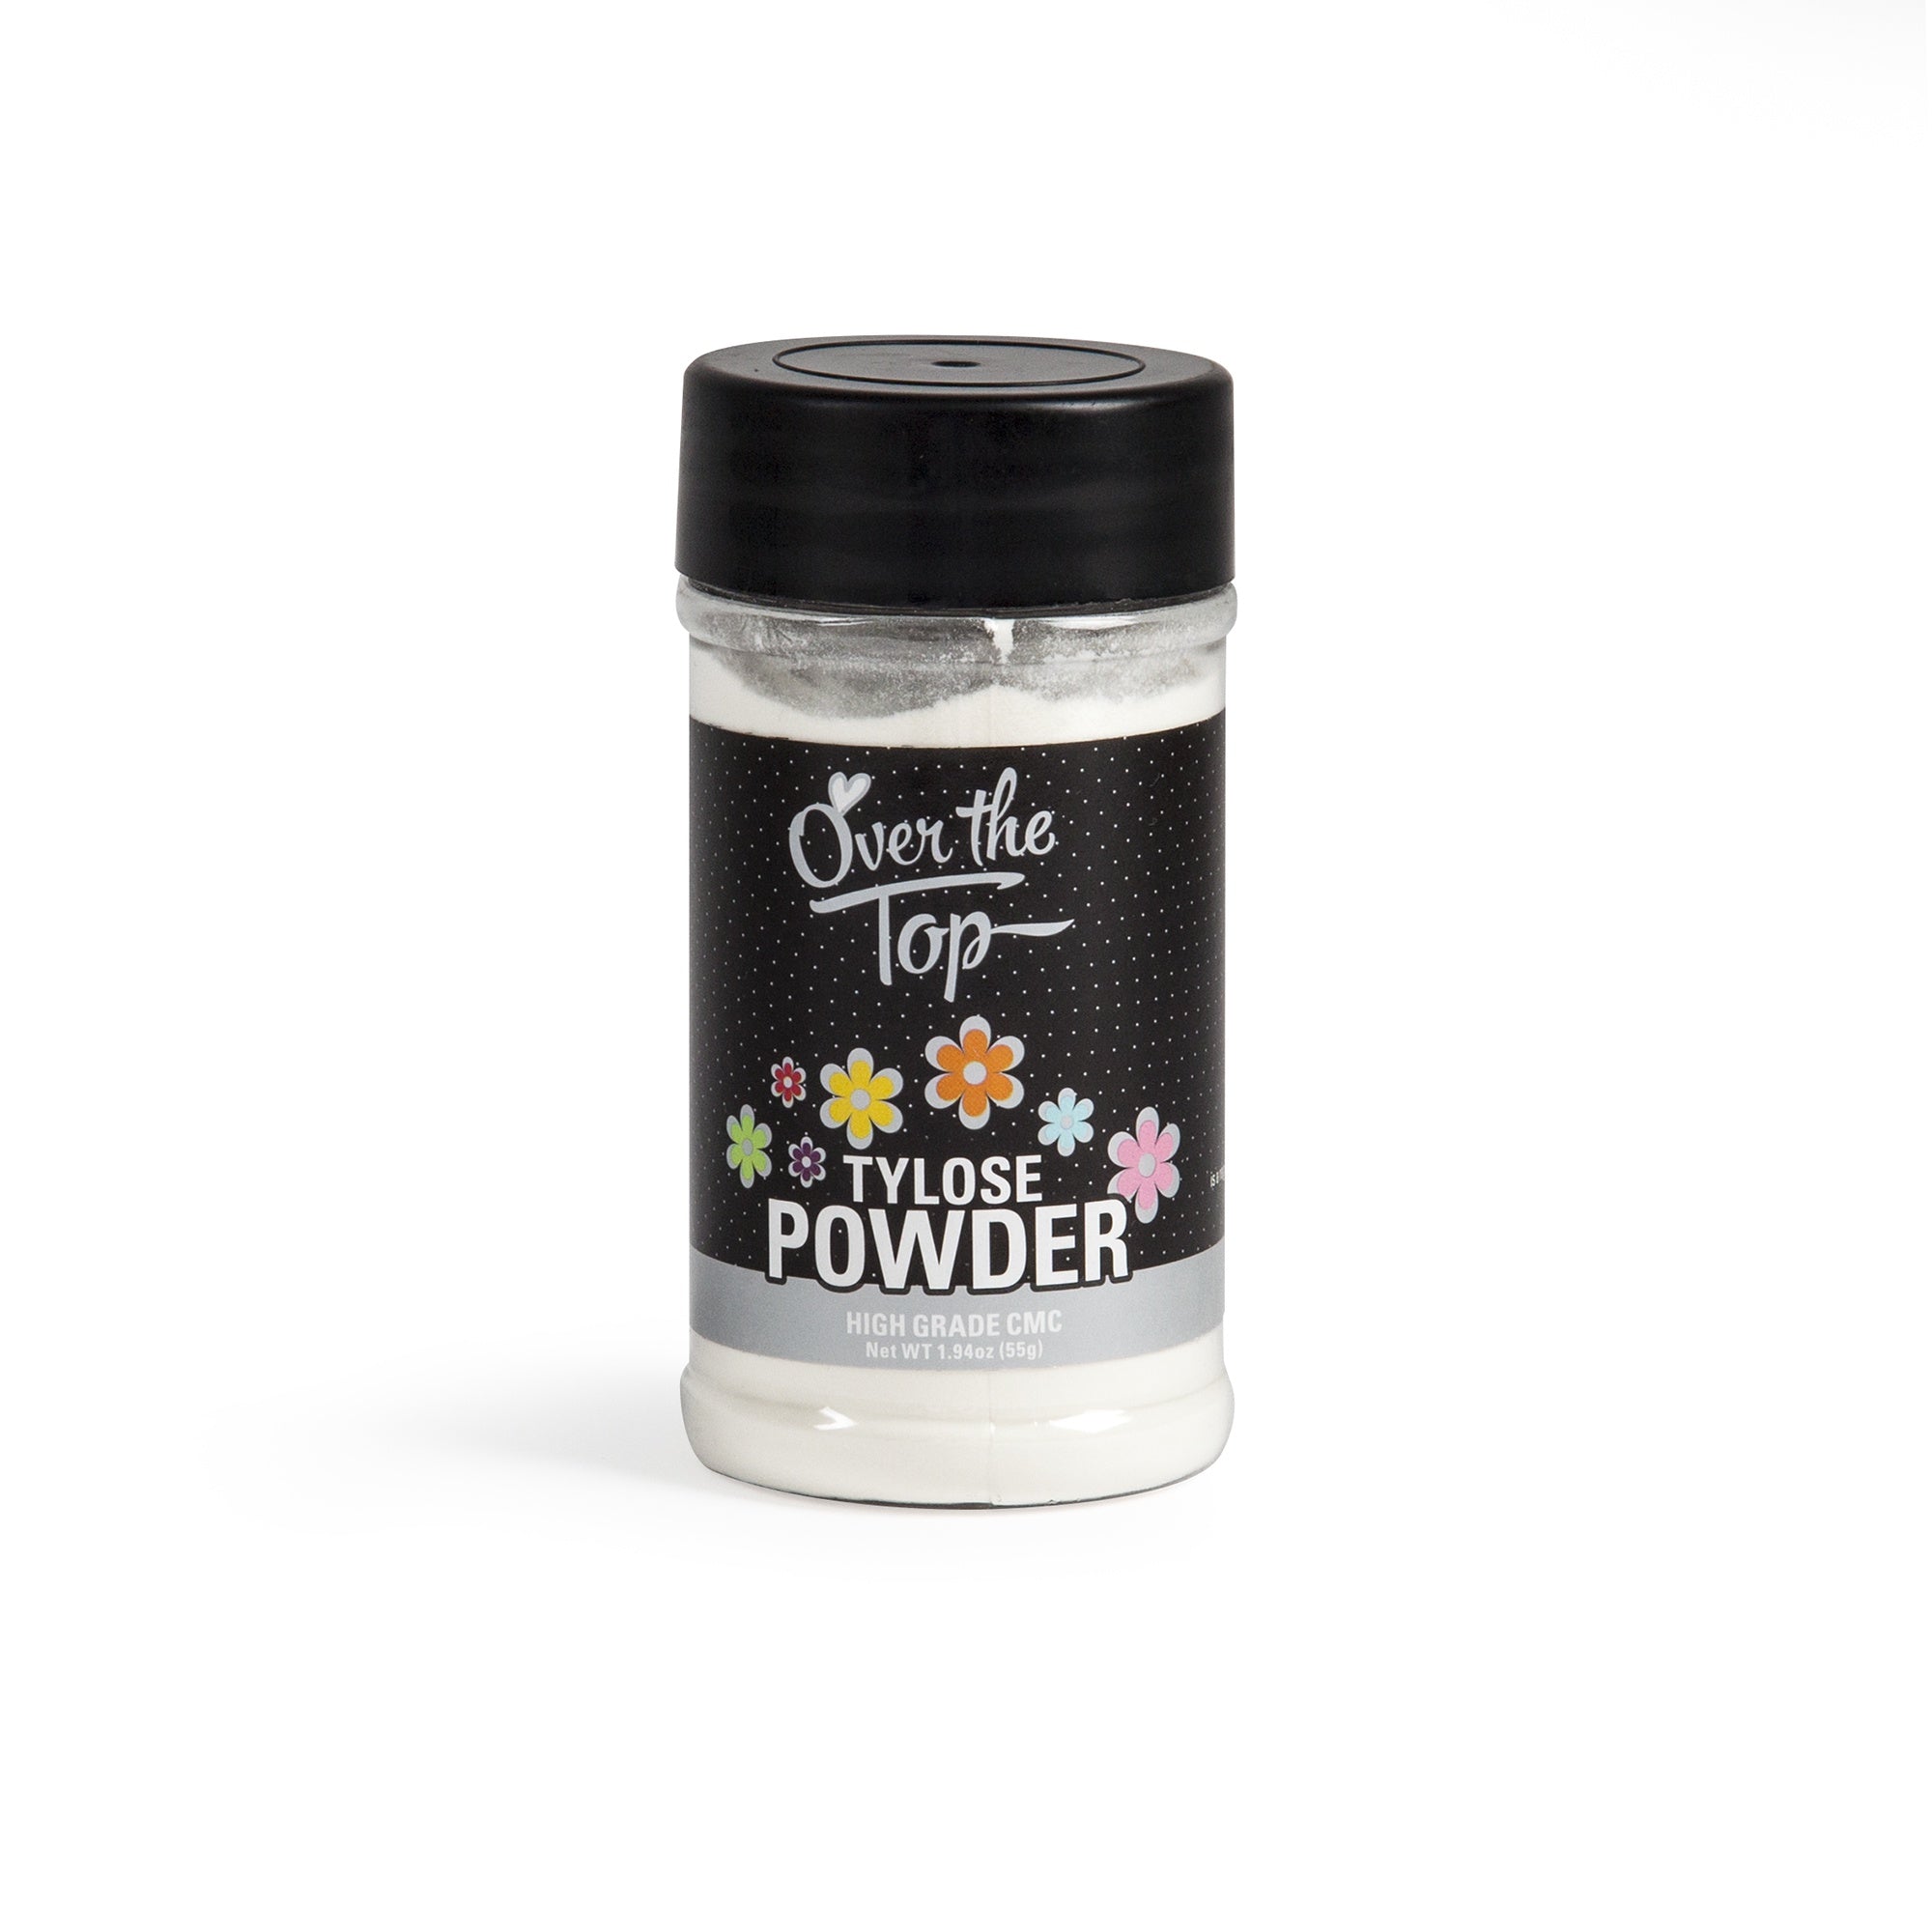 Over the Top Edible Tylose Powder